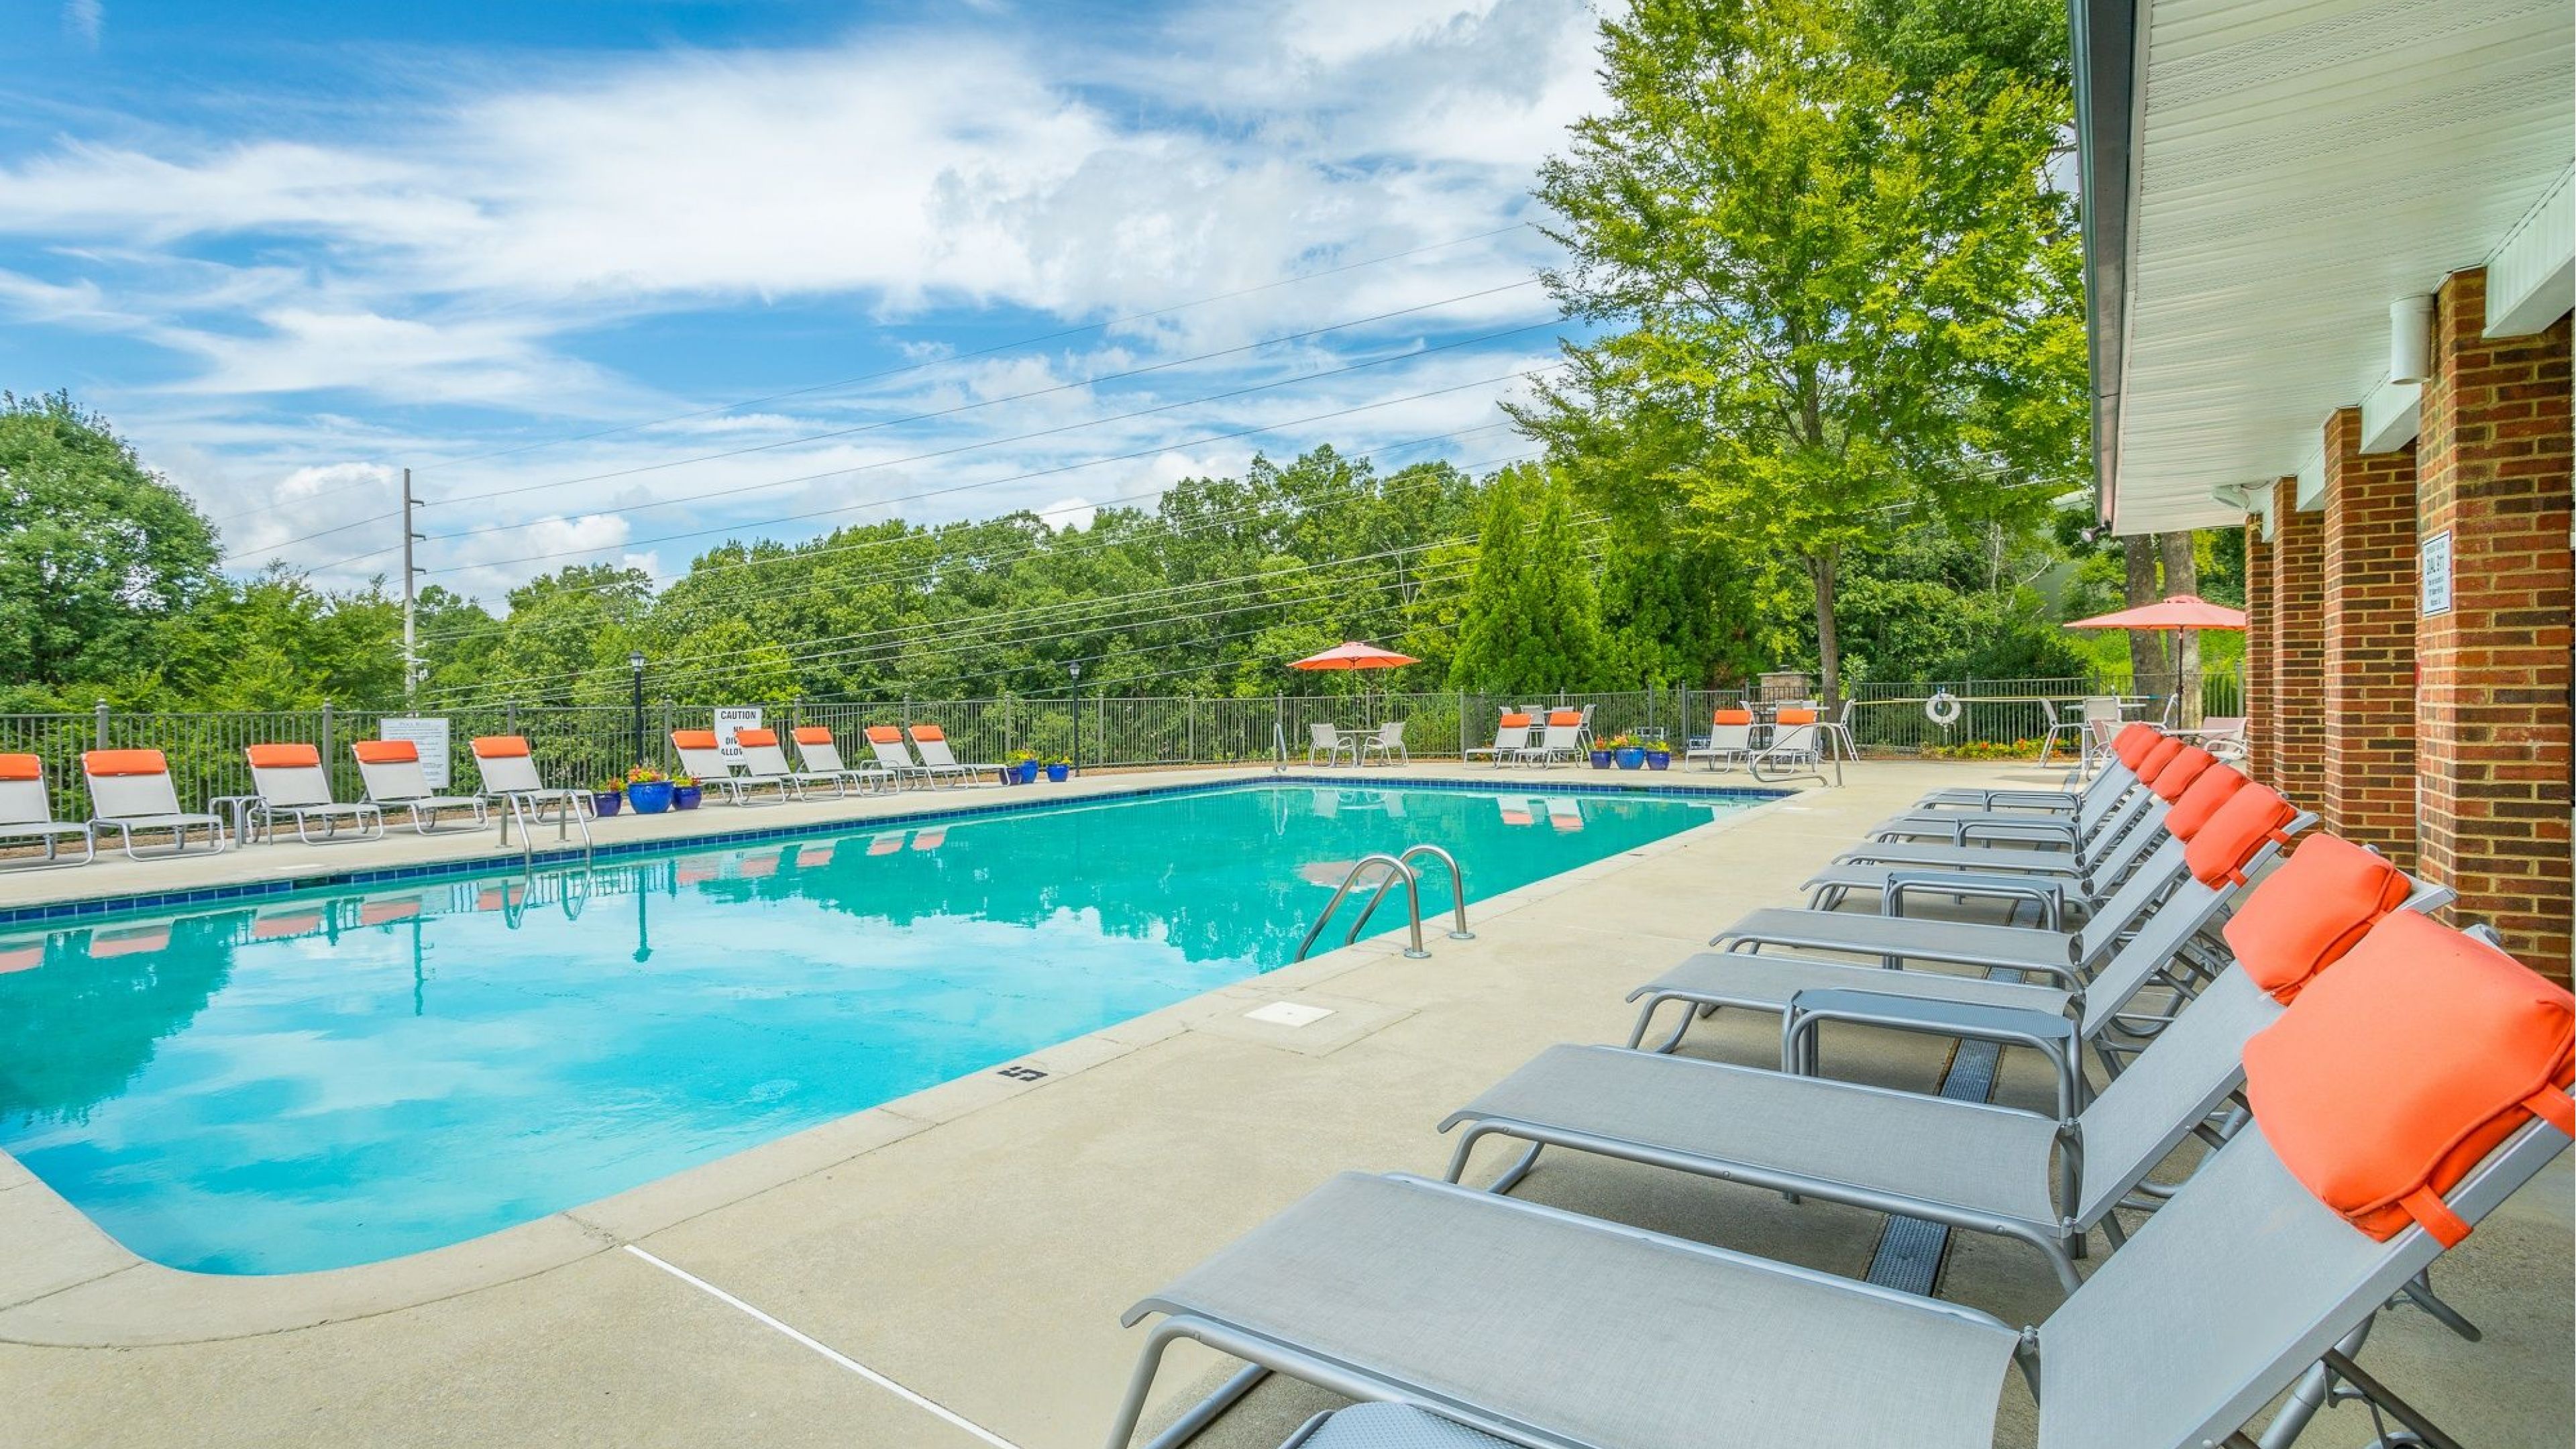 Hawthorne at the Ridge large outdoor pool with lounge chairs, surrounded by green trees